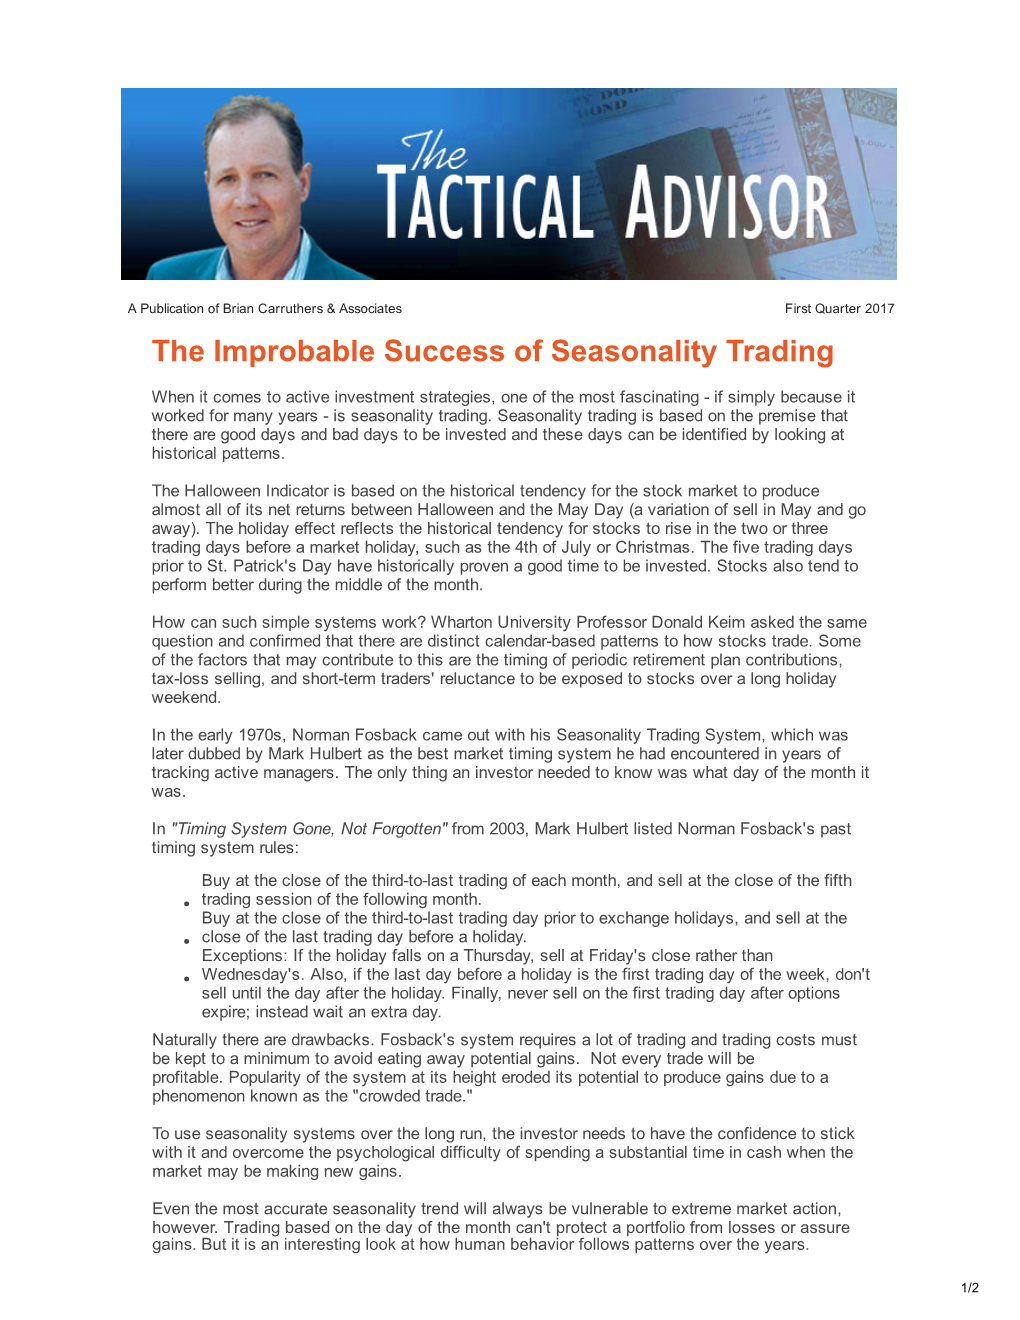 The Improbable Success of Seasonality Trading